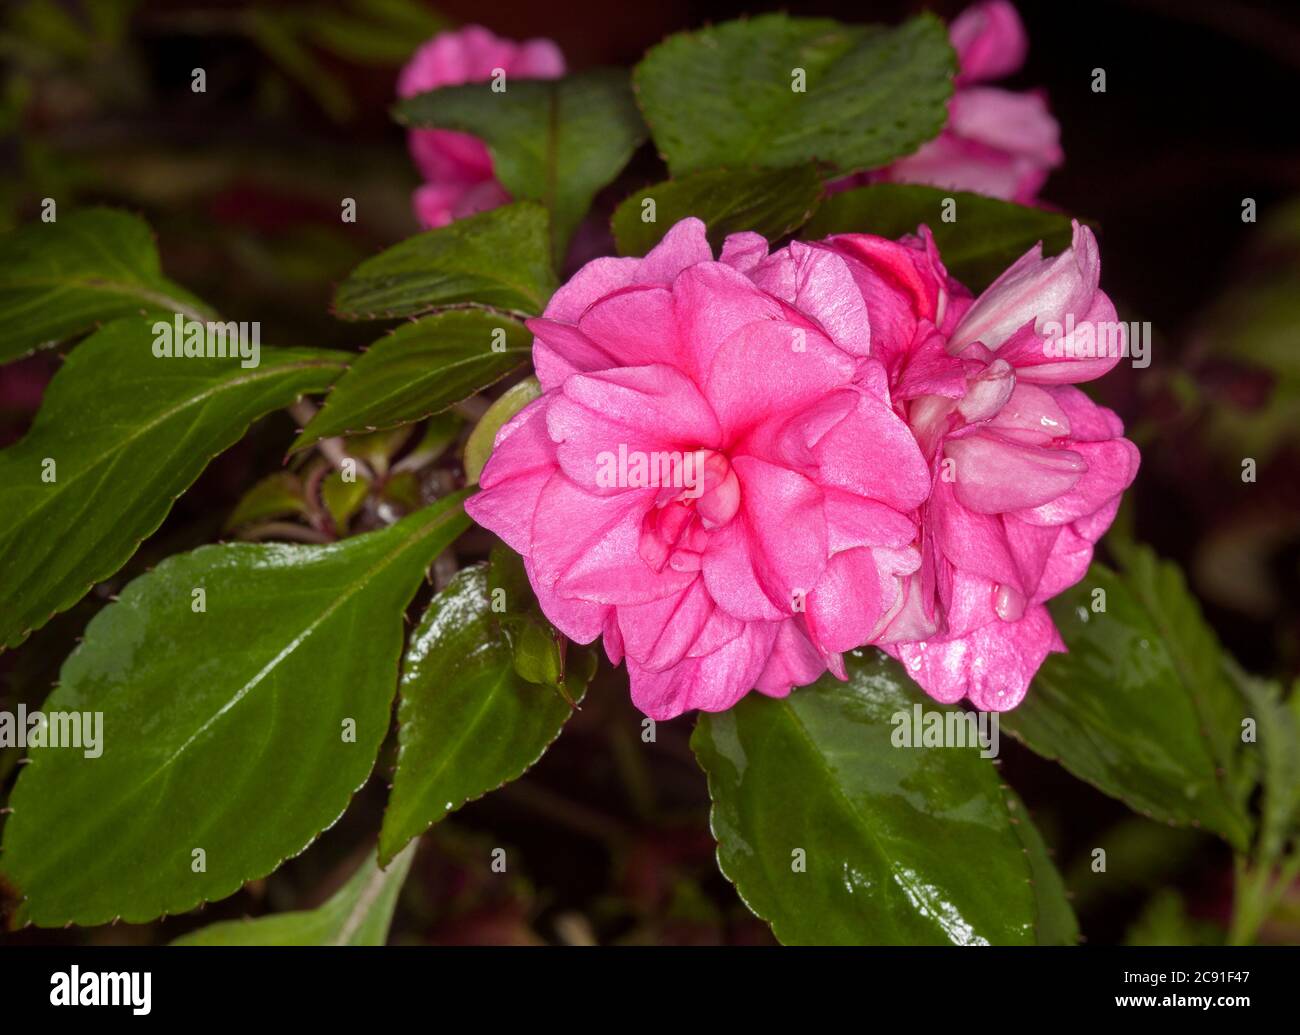 Double vivid pink flowers against dark green leaves of Impatiens walleriana, a shade loving plant in Australia Stock Photo